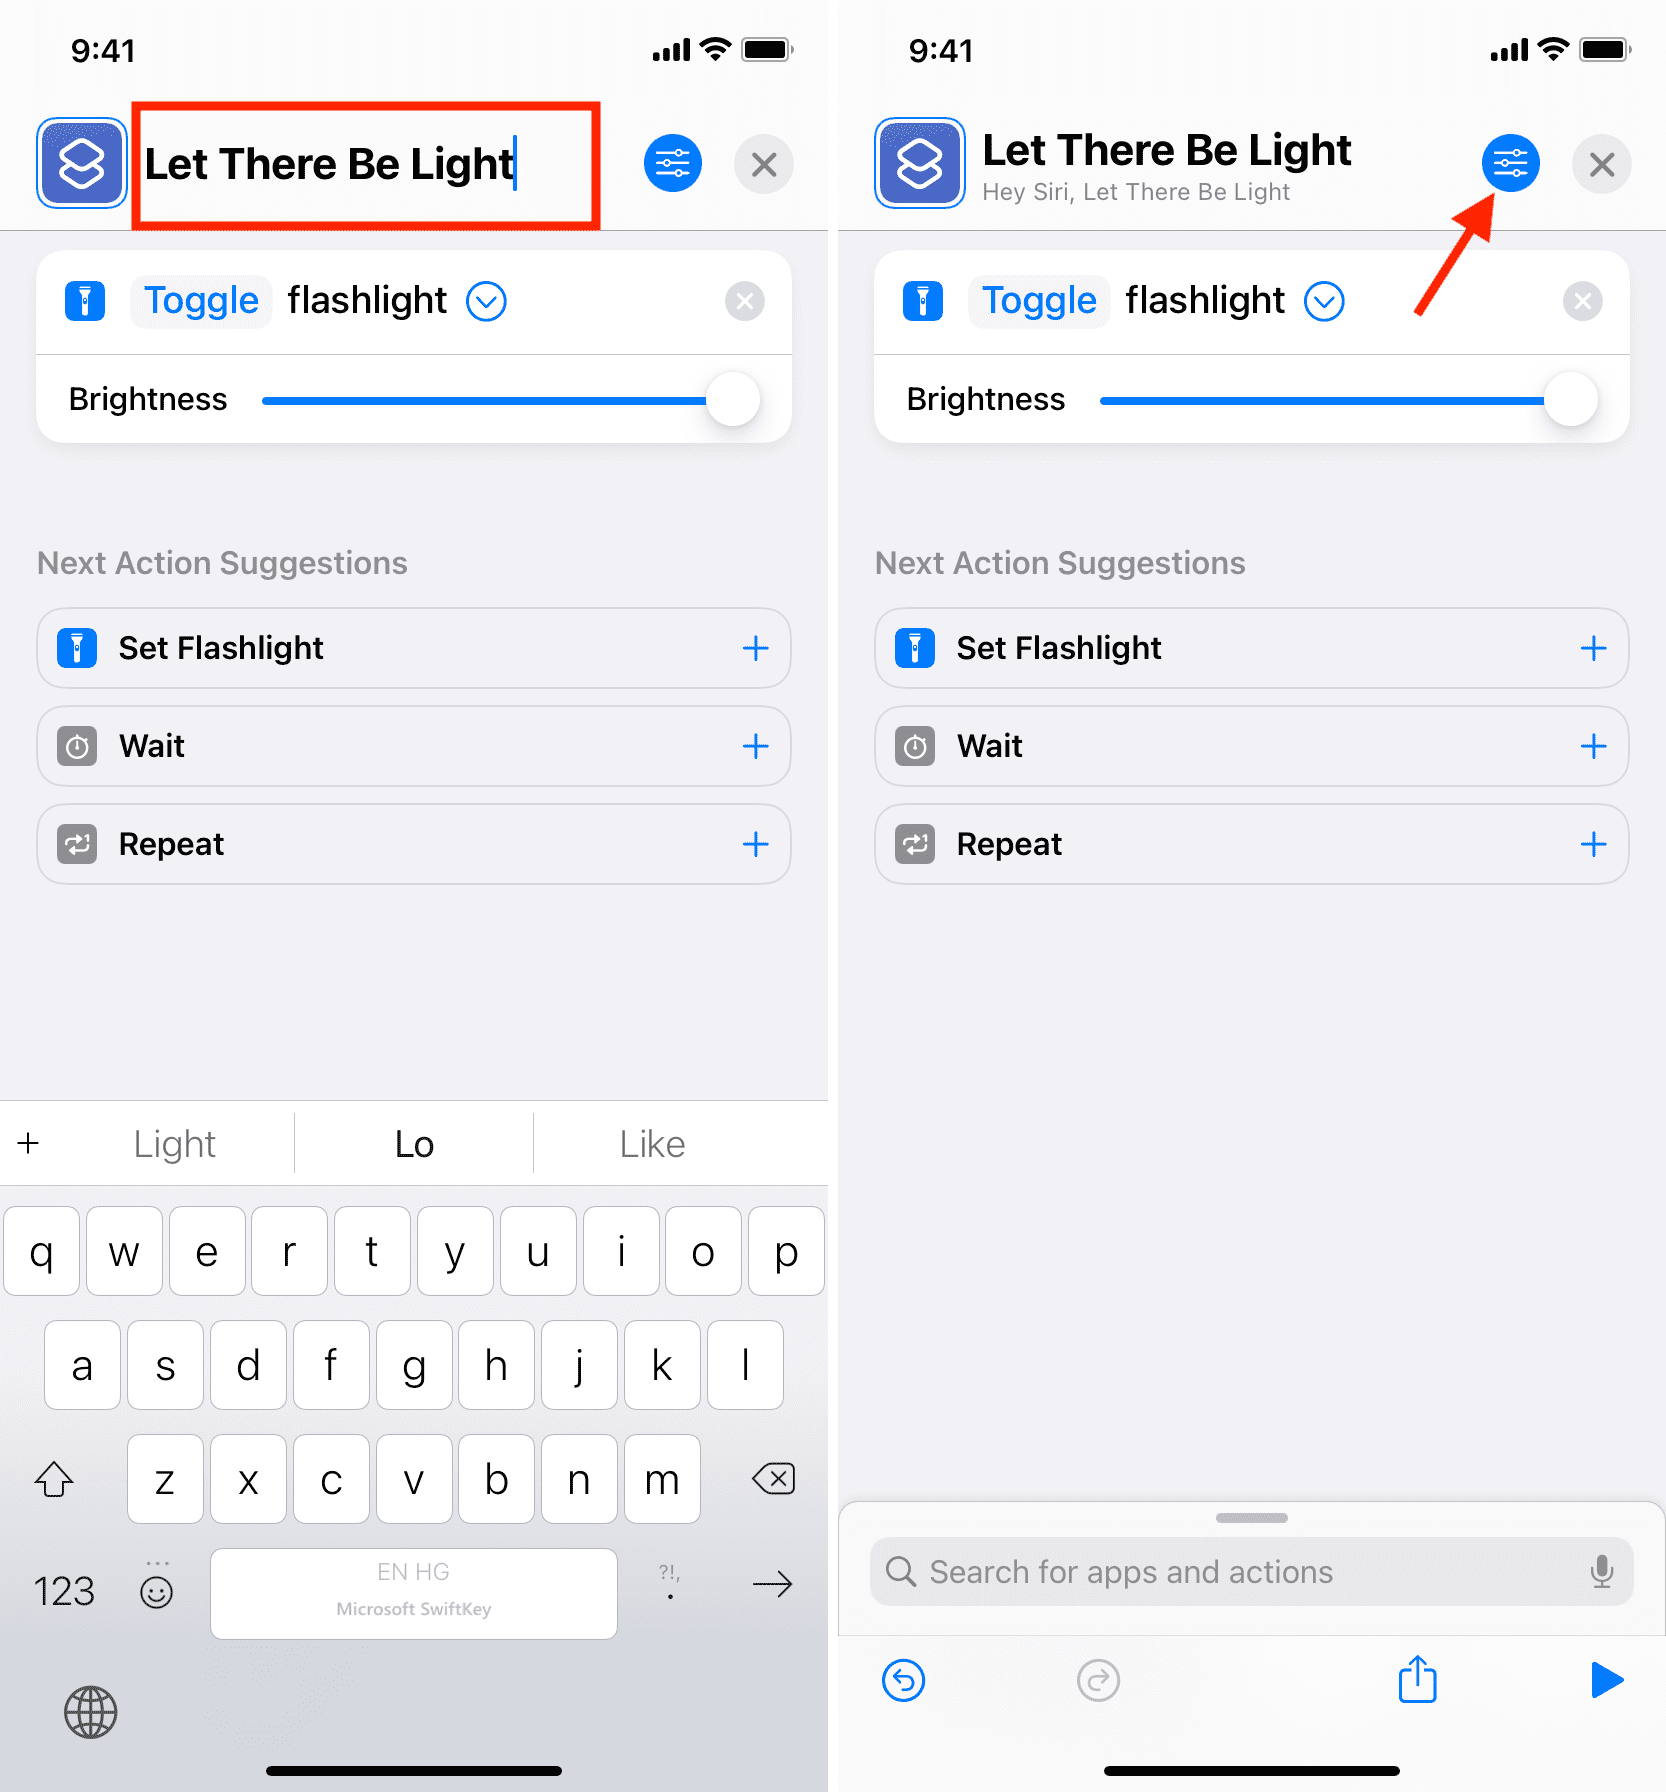 Let there be light shortcut name